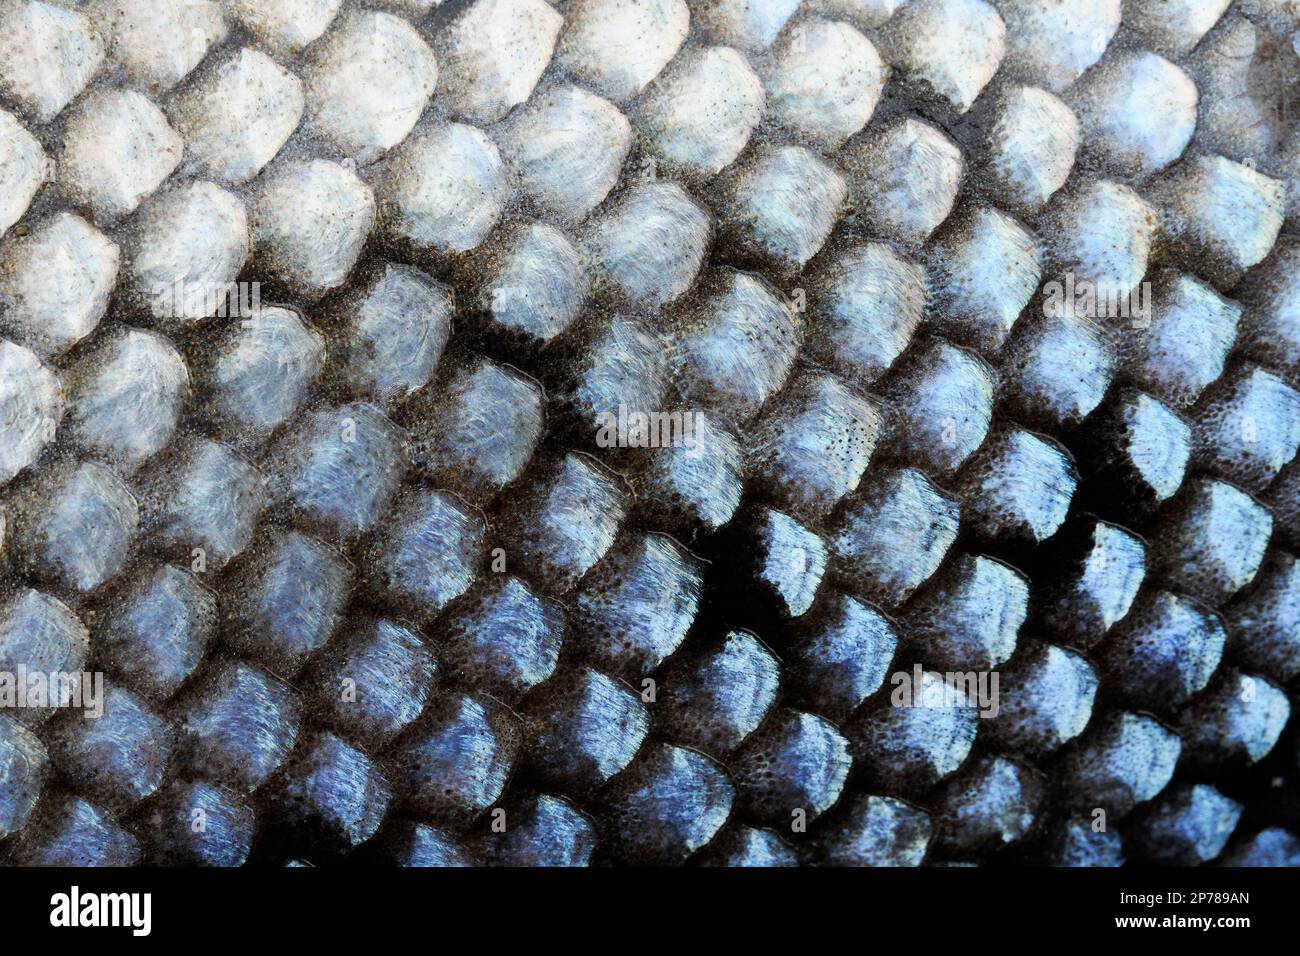 Atlantic Salmon (Salmo salar) close-up of scales on the flank of a mature fish caught by a poachers monofilament gill net on the River Tweed Stock Photo